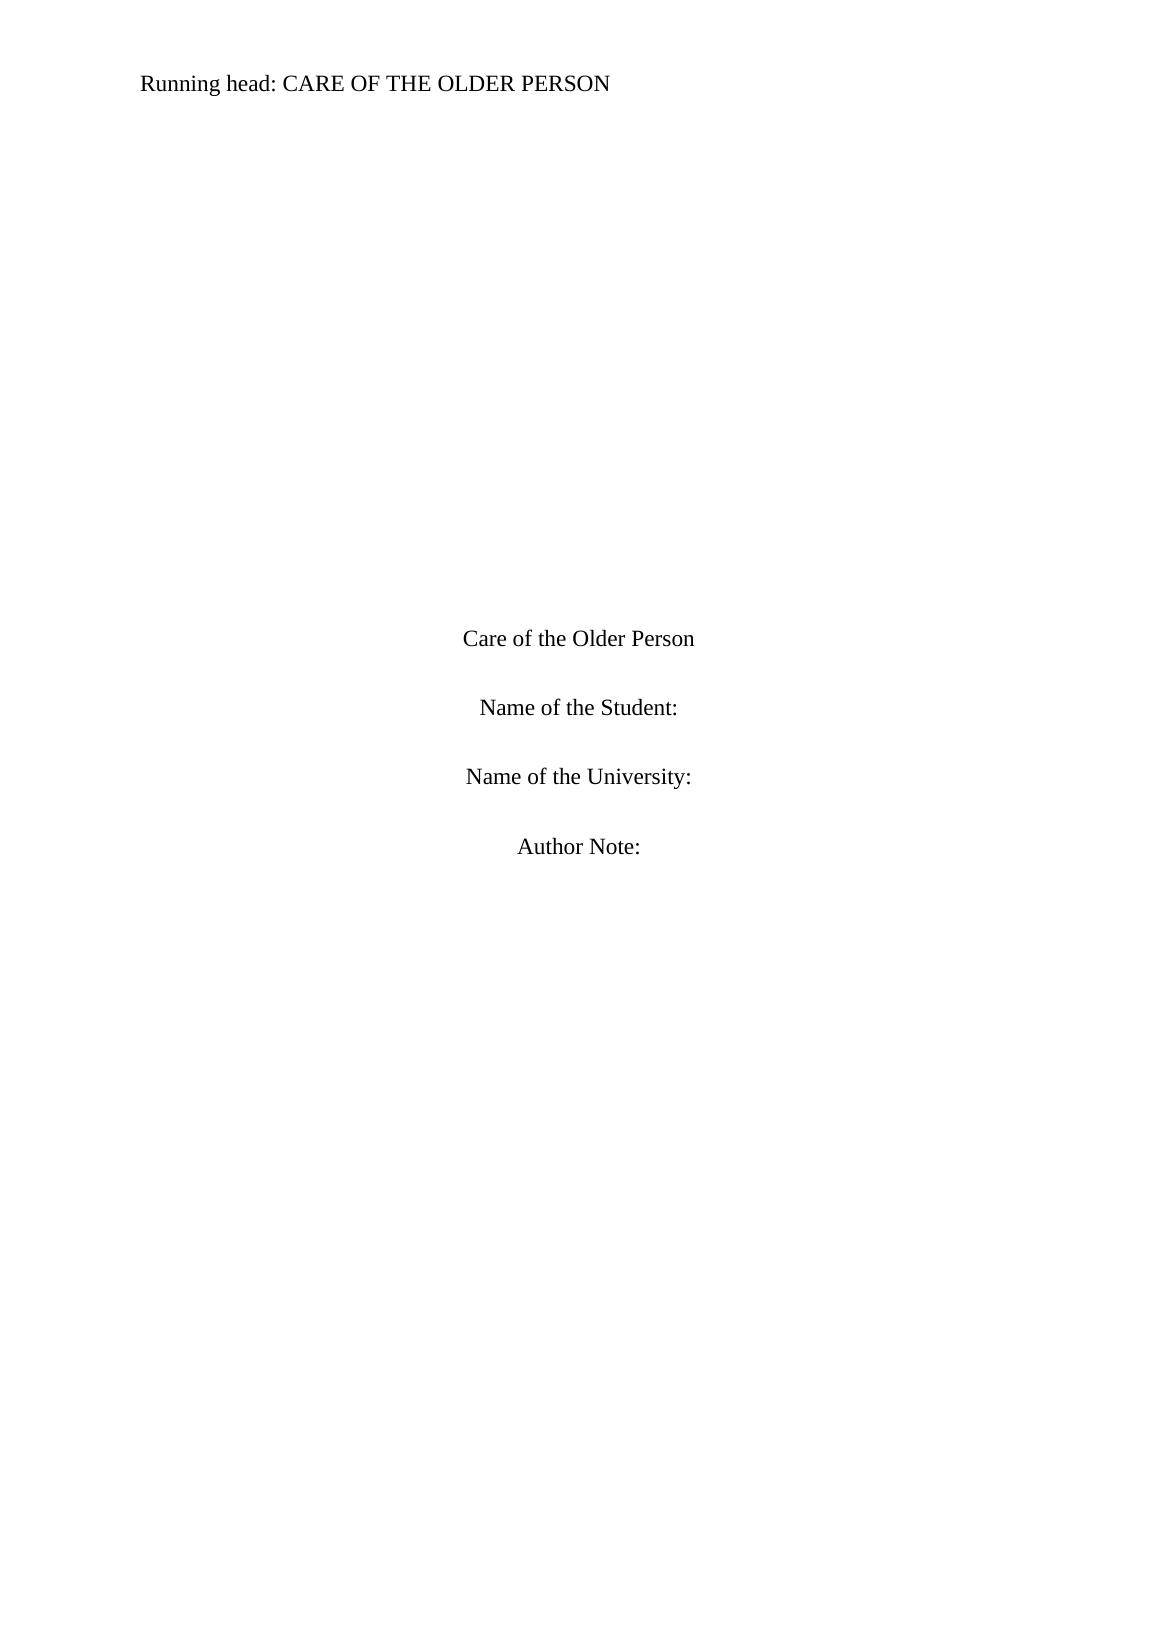 Aged Care Nursing Assignment | Care of the Older Person_1